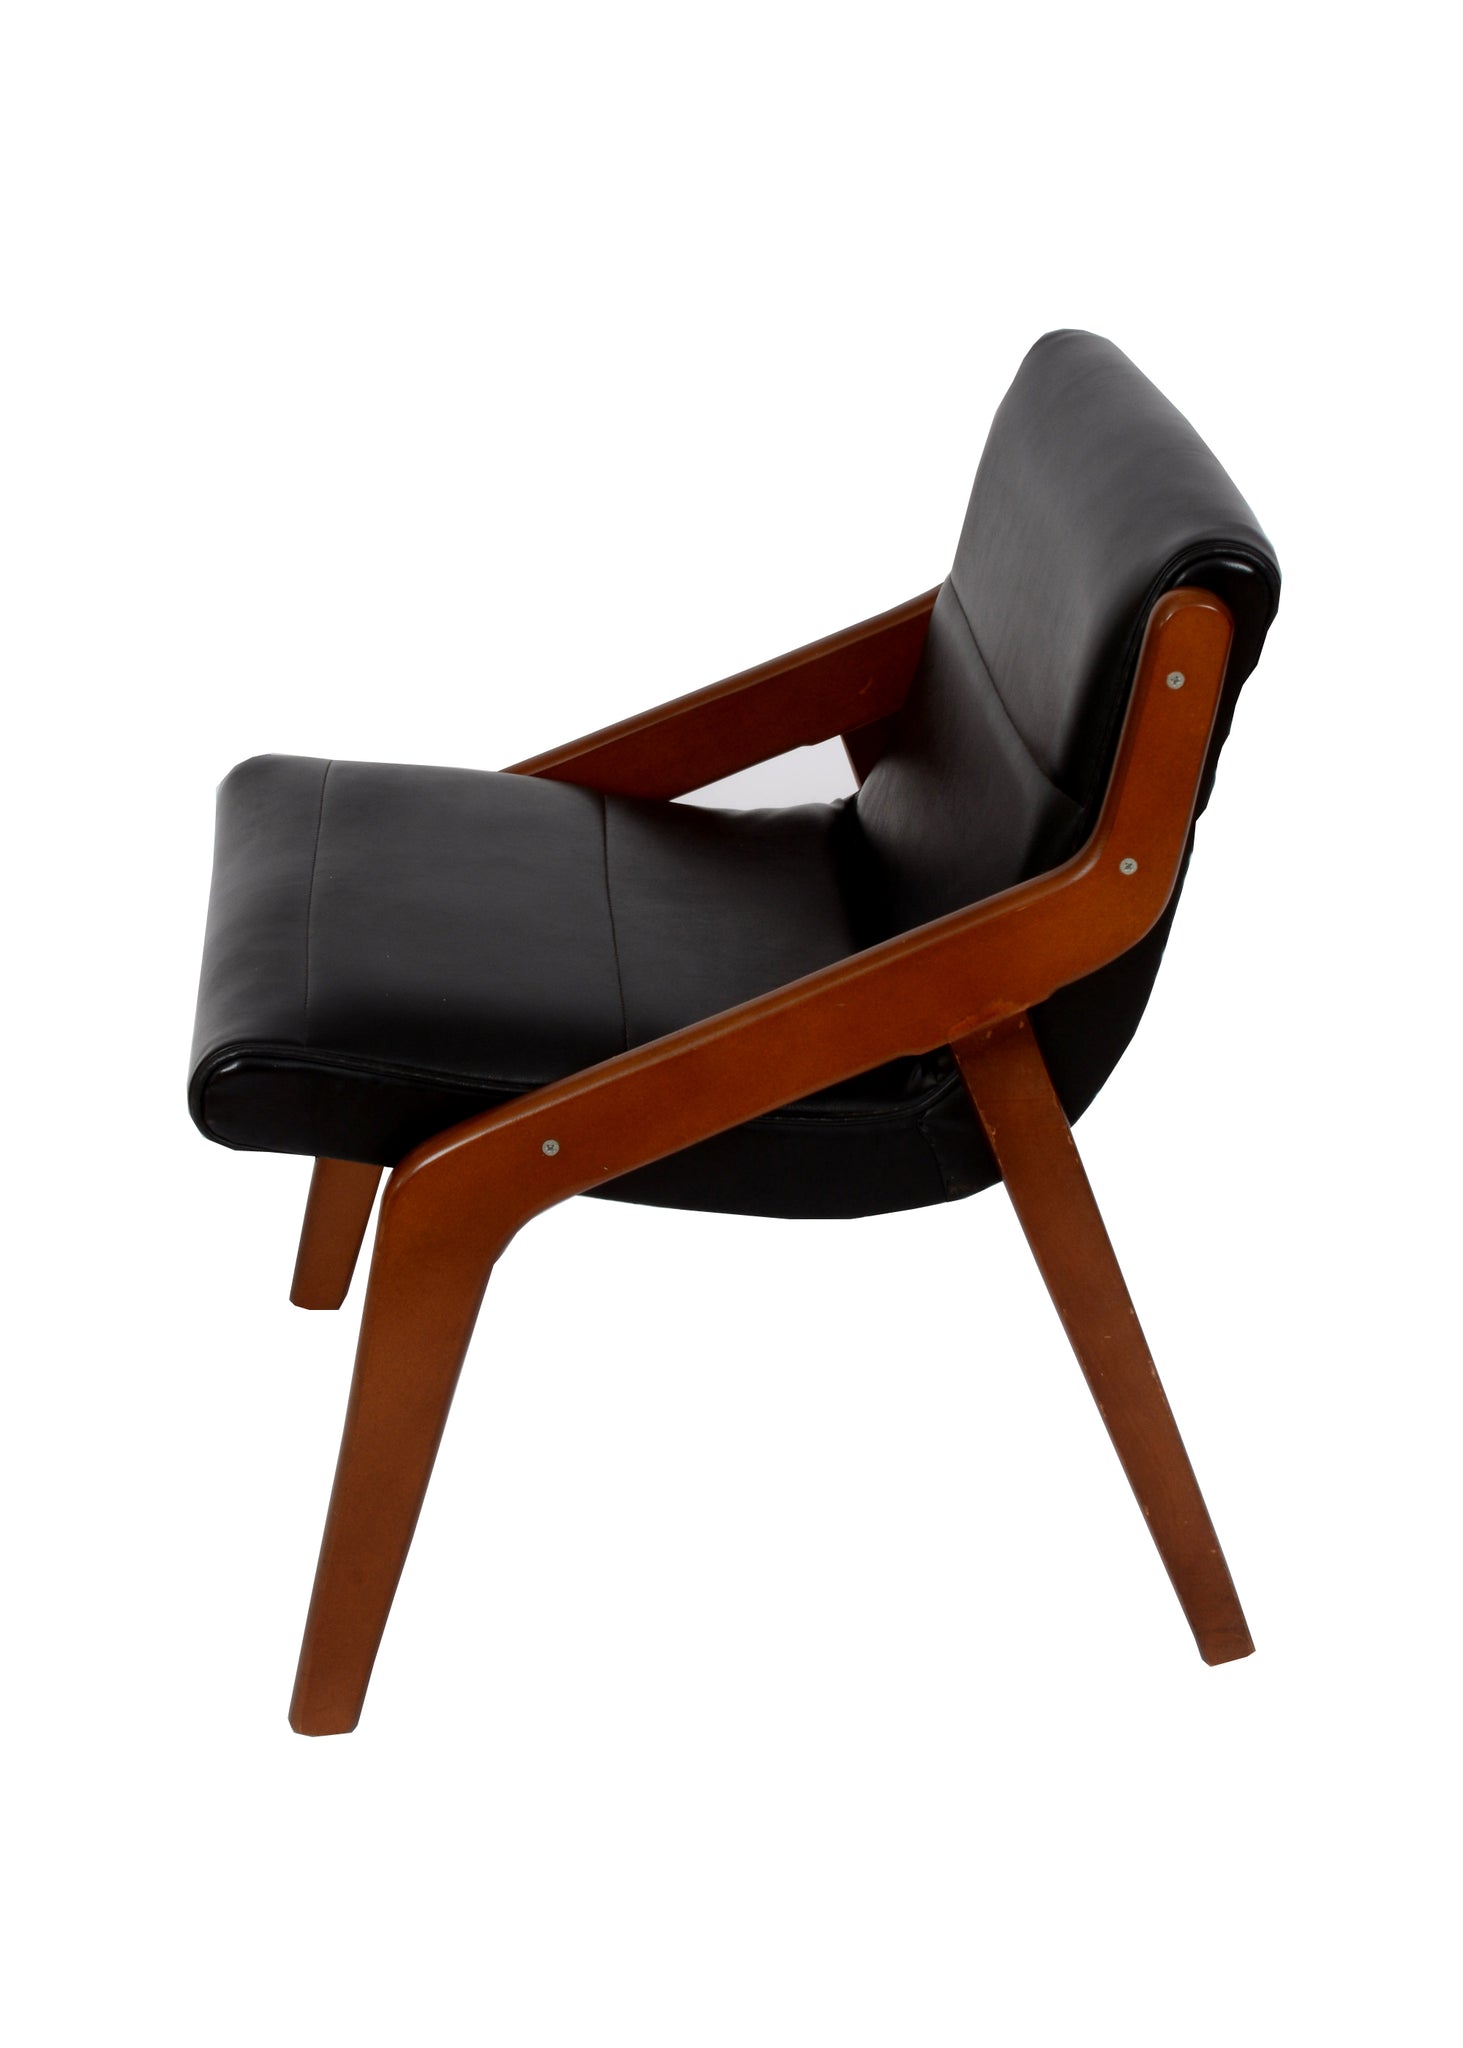 Lounge Chair inspired by Neil Morris of Glasgow.